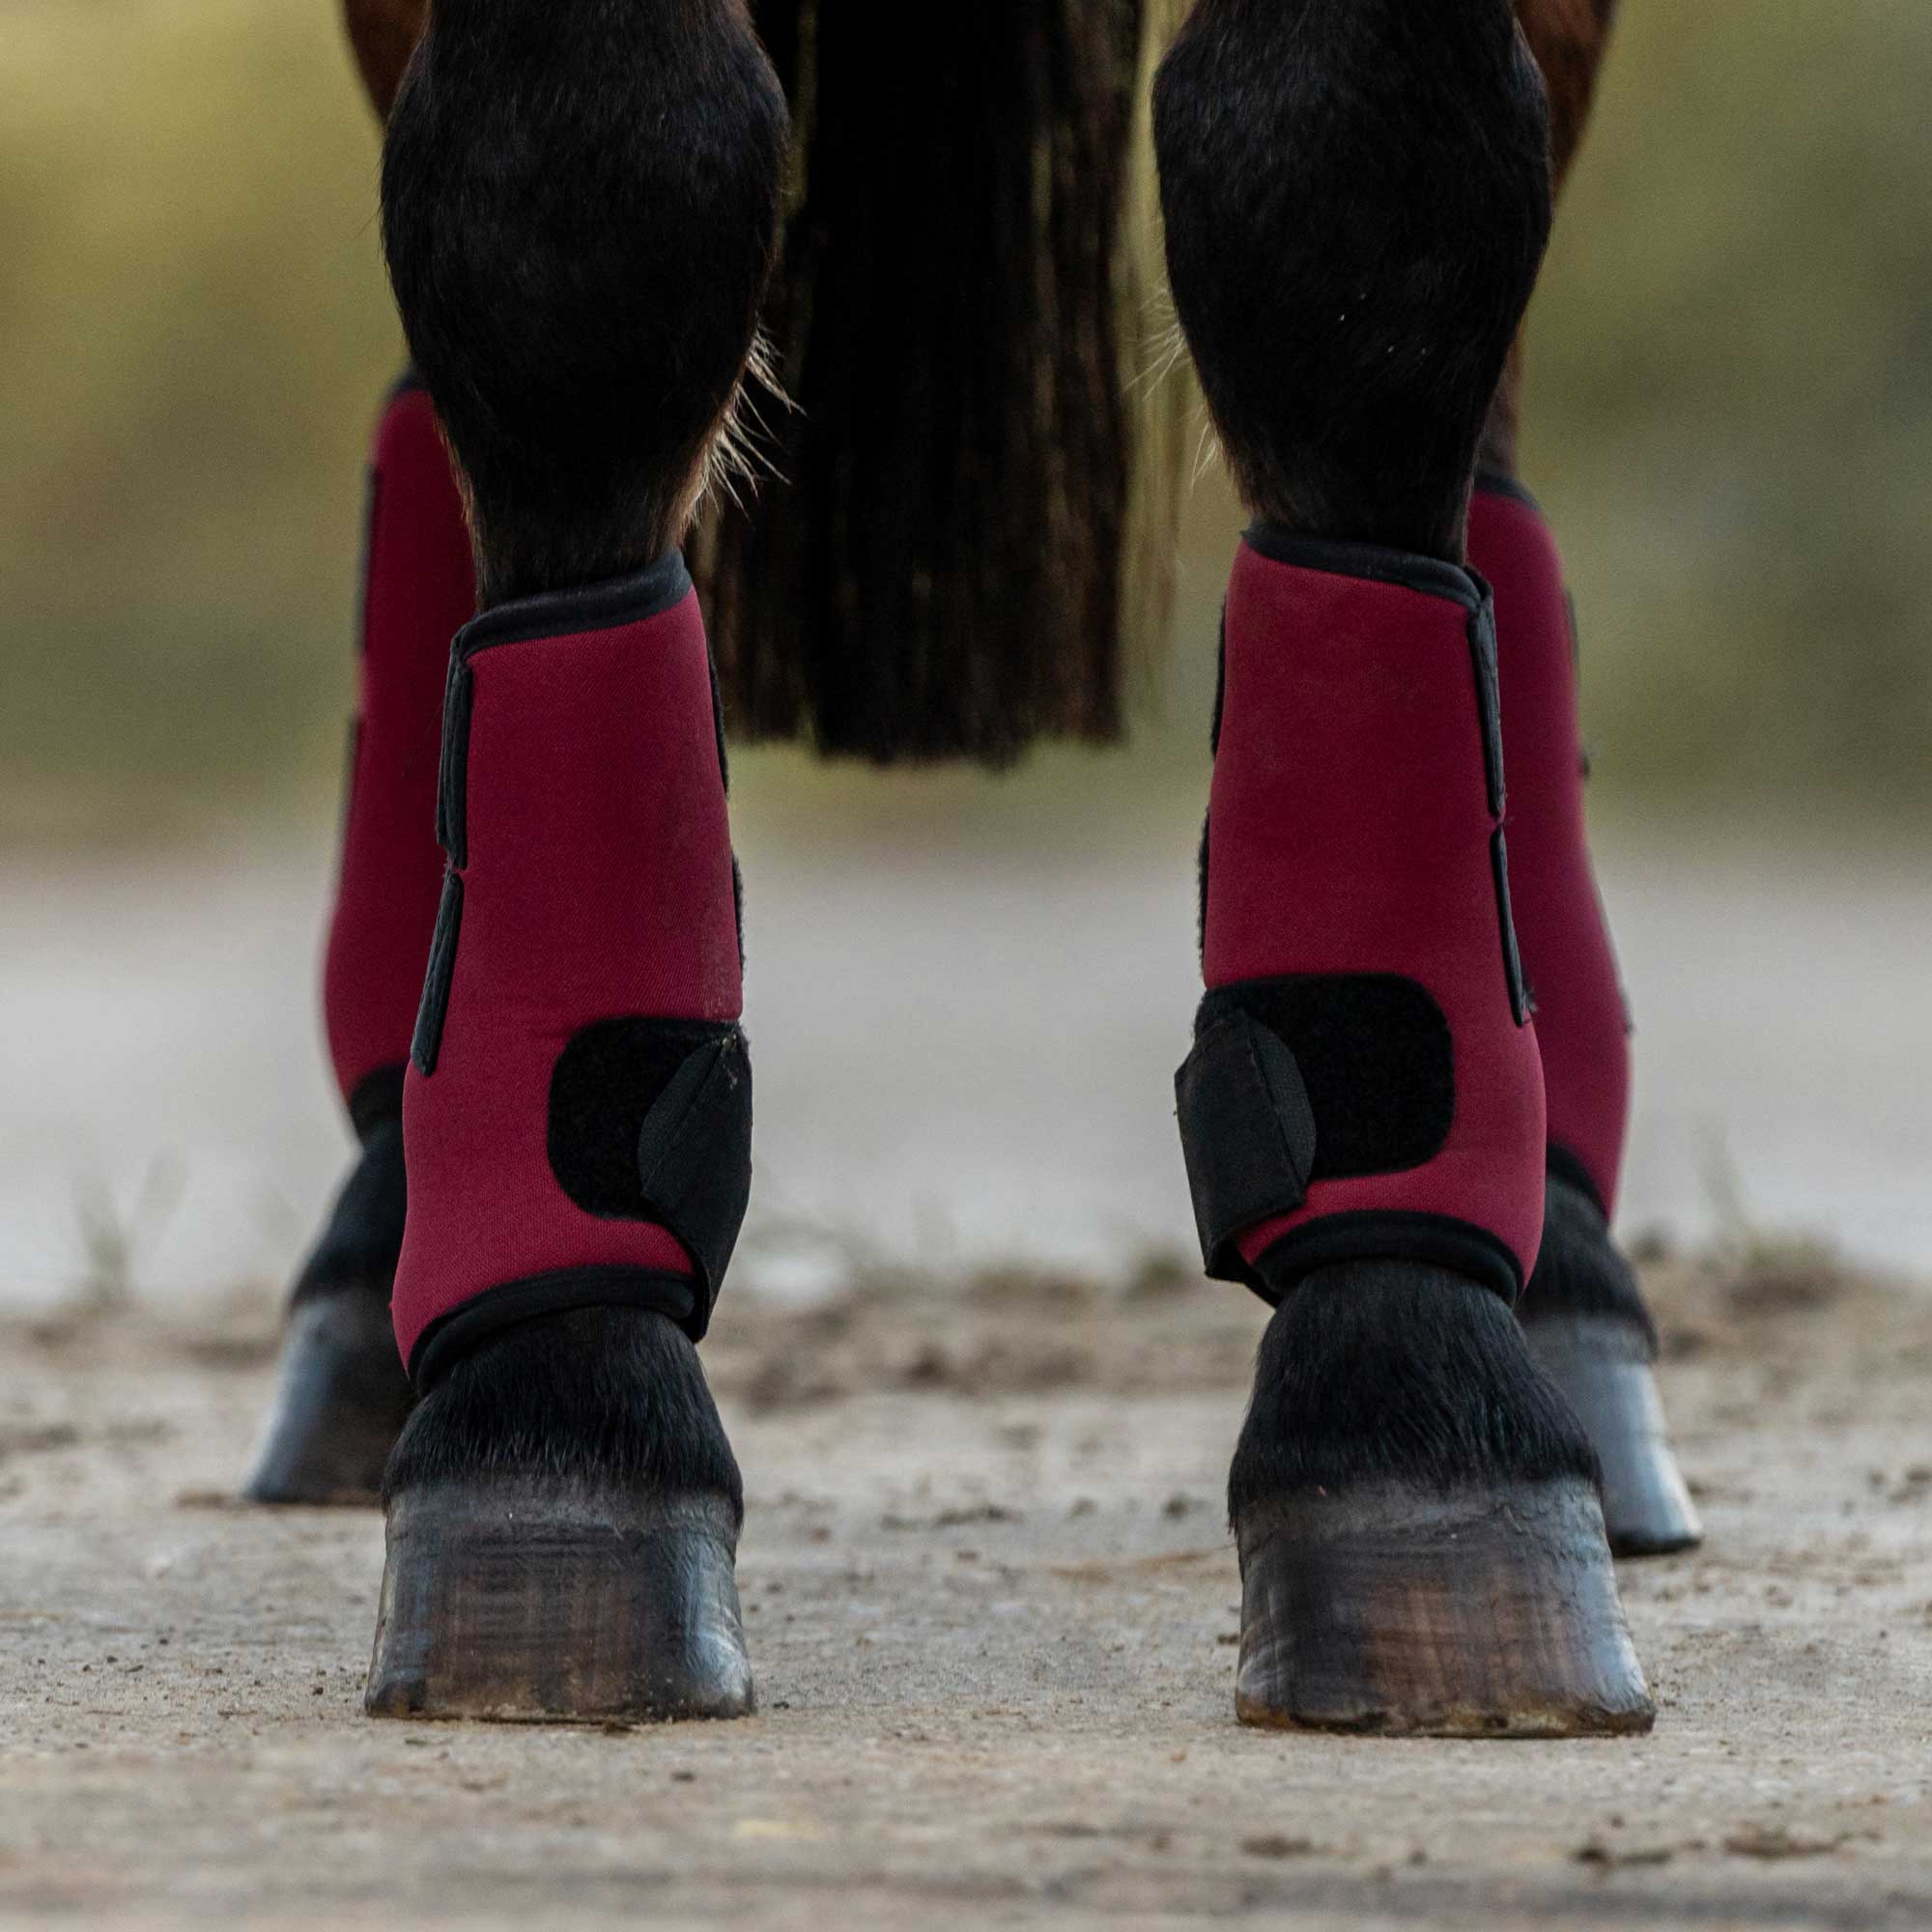 "Opal" Exercise Boots, Hind Legs